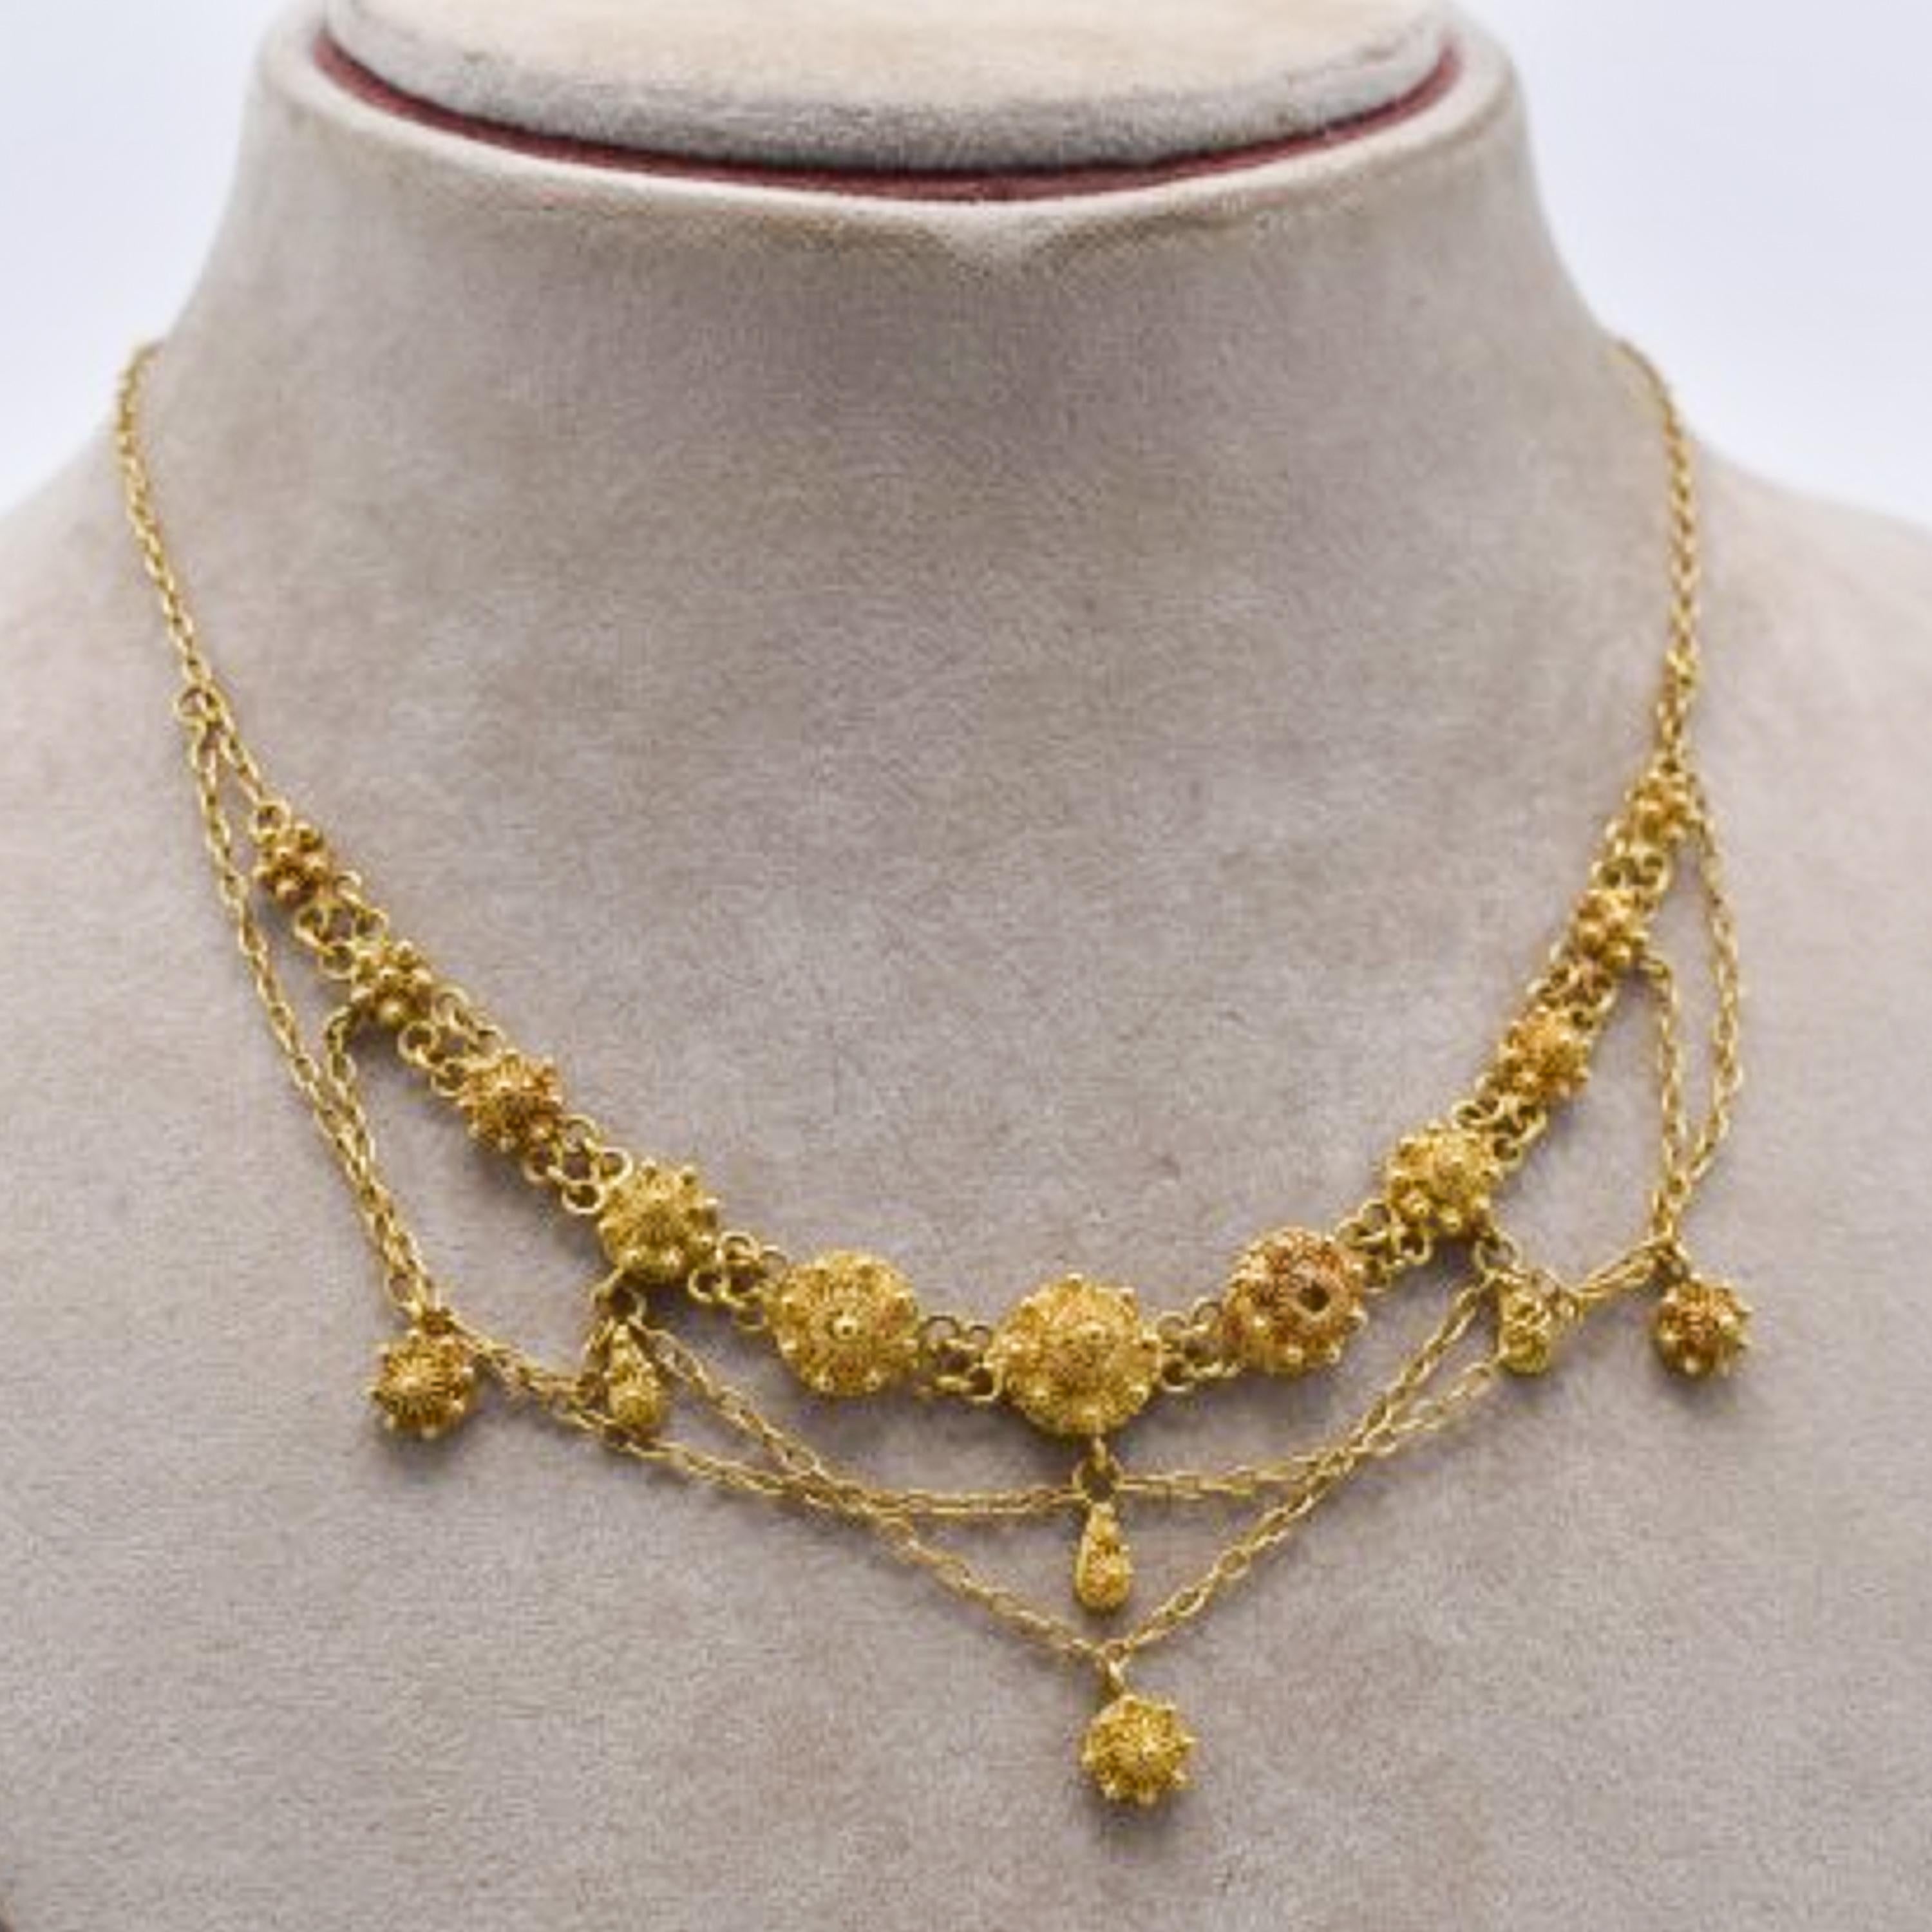 Nineteenth century 14 karat yellow gold chain pendant necklace. The necklace features eleven filigree knots and the chain pendants have six knots in total. This exceptional craftsmanship of the granulation technique, gold wirework twisted scrolls